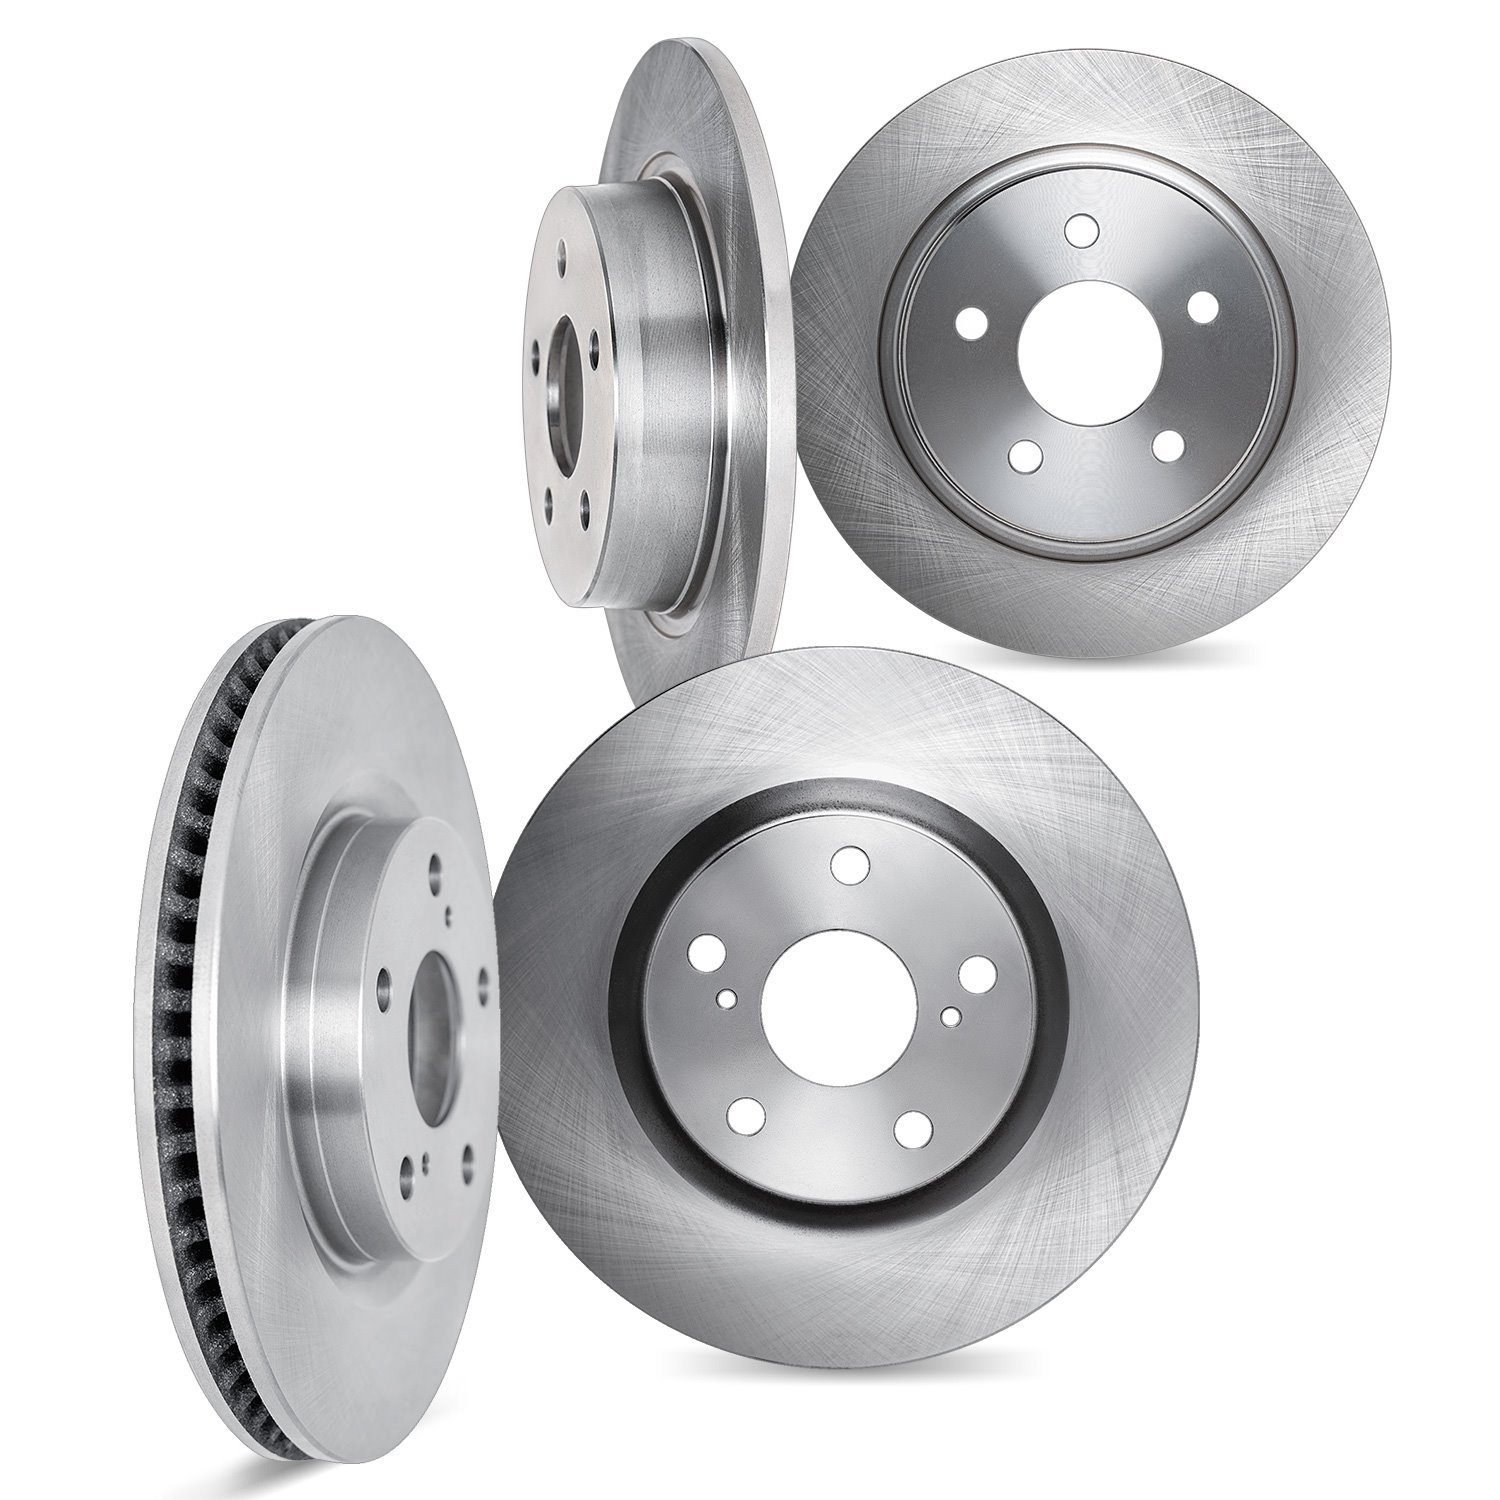 6004-67281 Brake Rotors, Fits Select Infiniti/Nissan, Position: Front and Rear